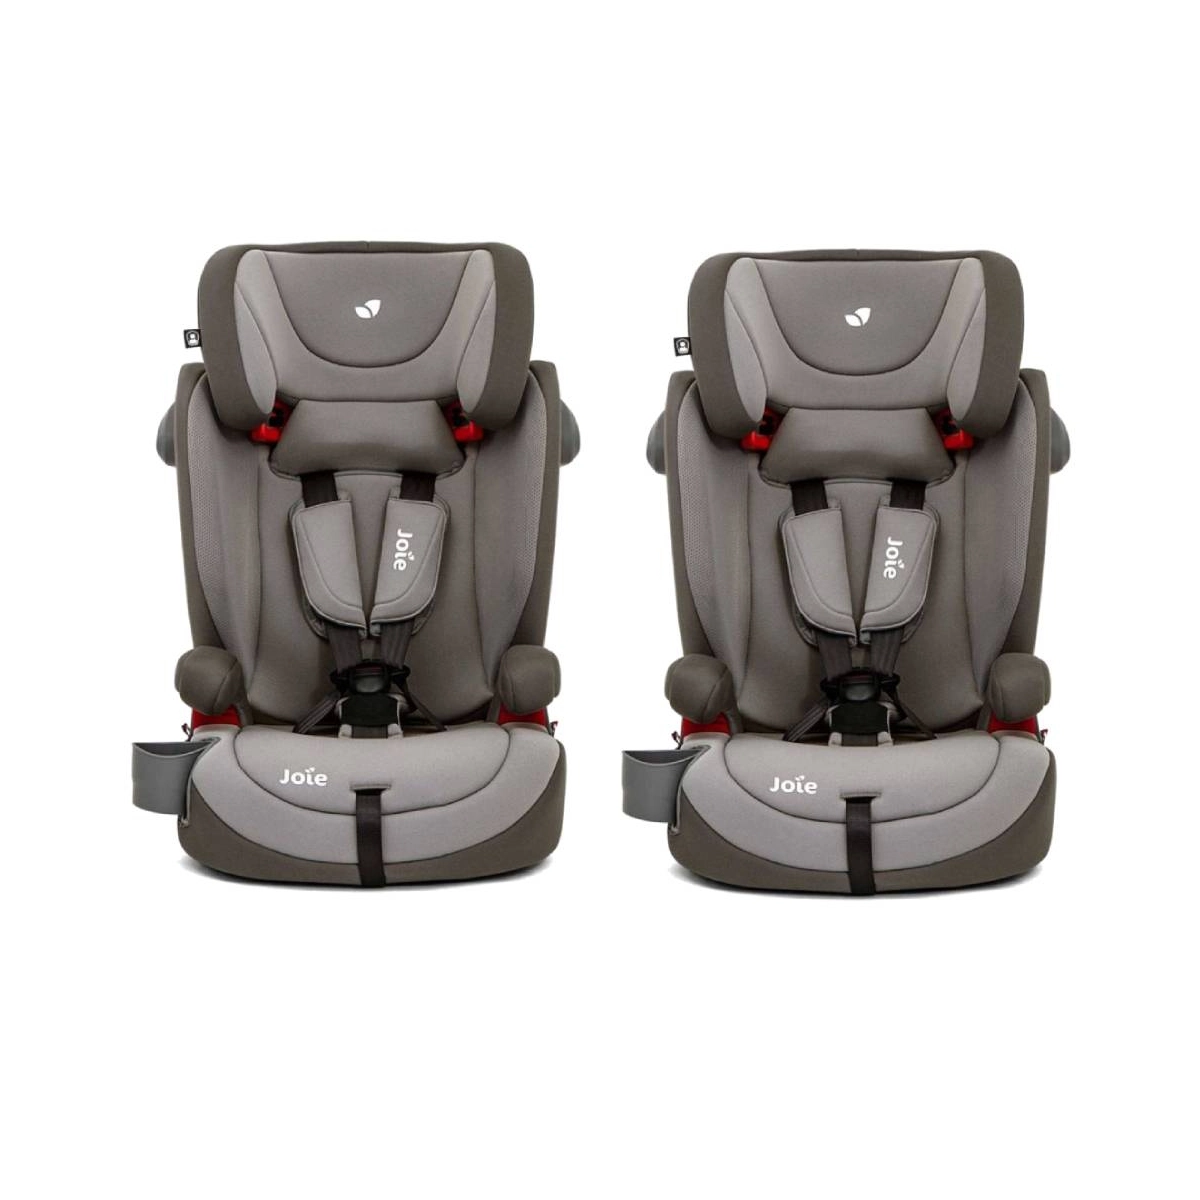 Joie Elevate 2.0 Group 1/2/3 Car Seat (Pack of 2)